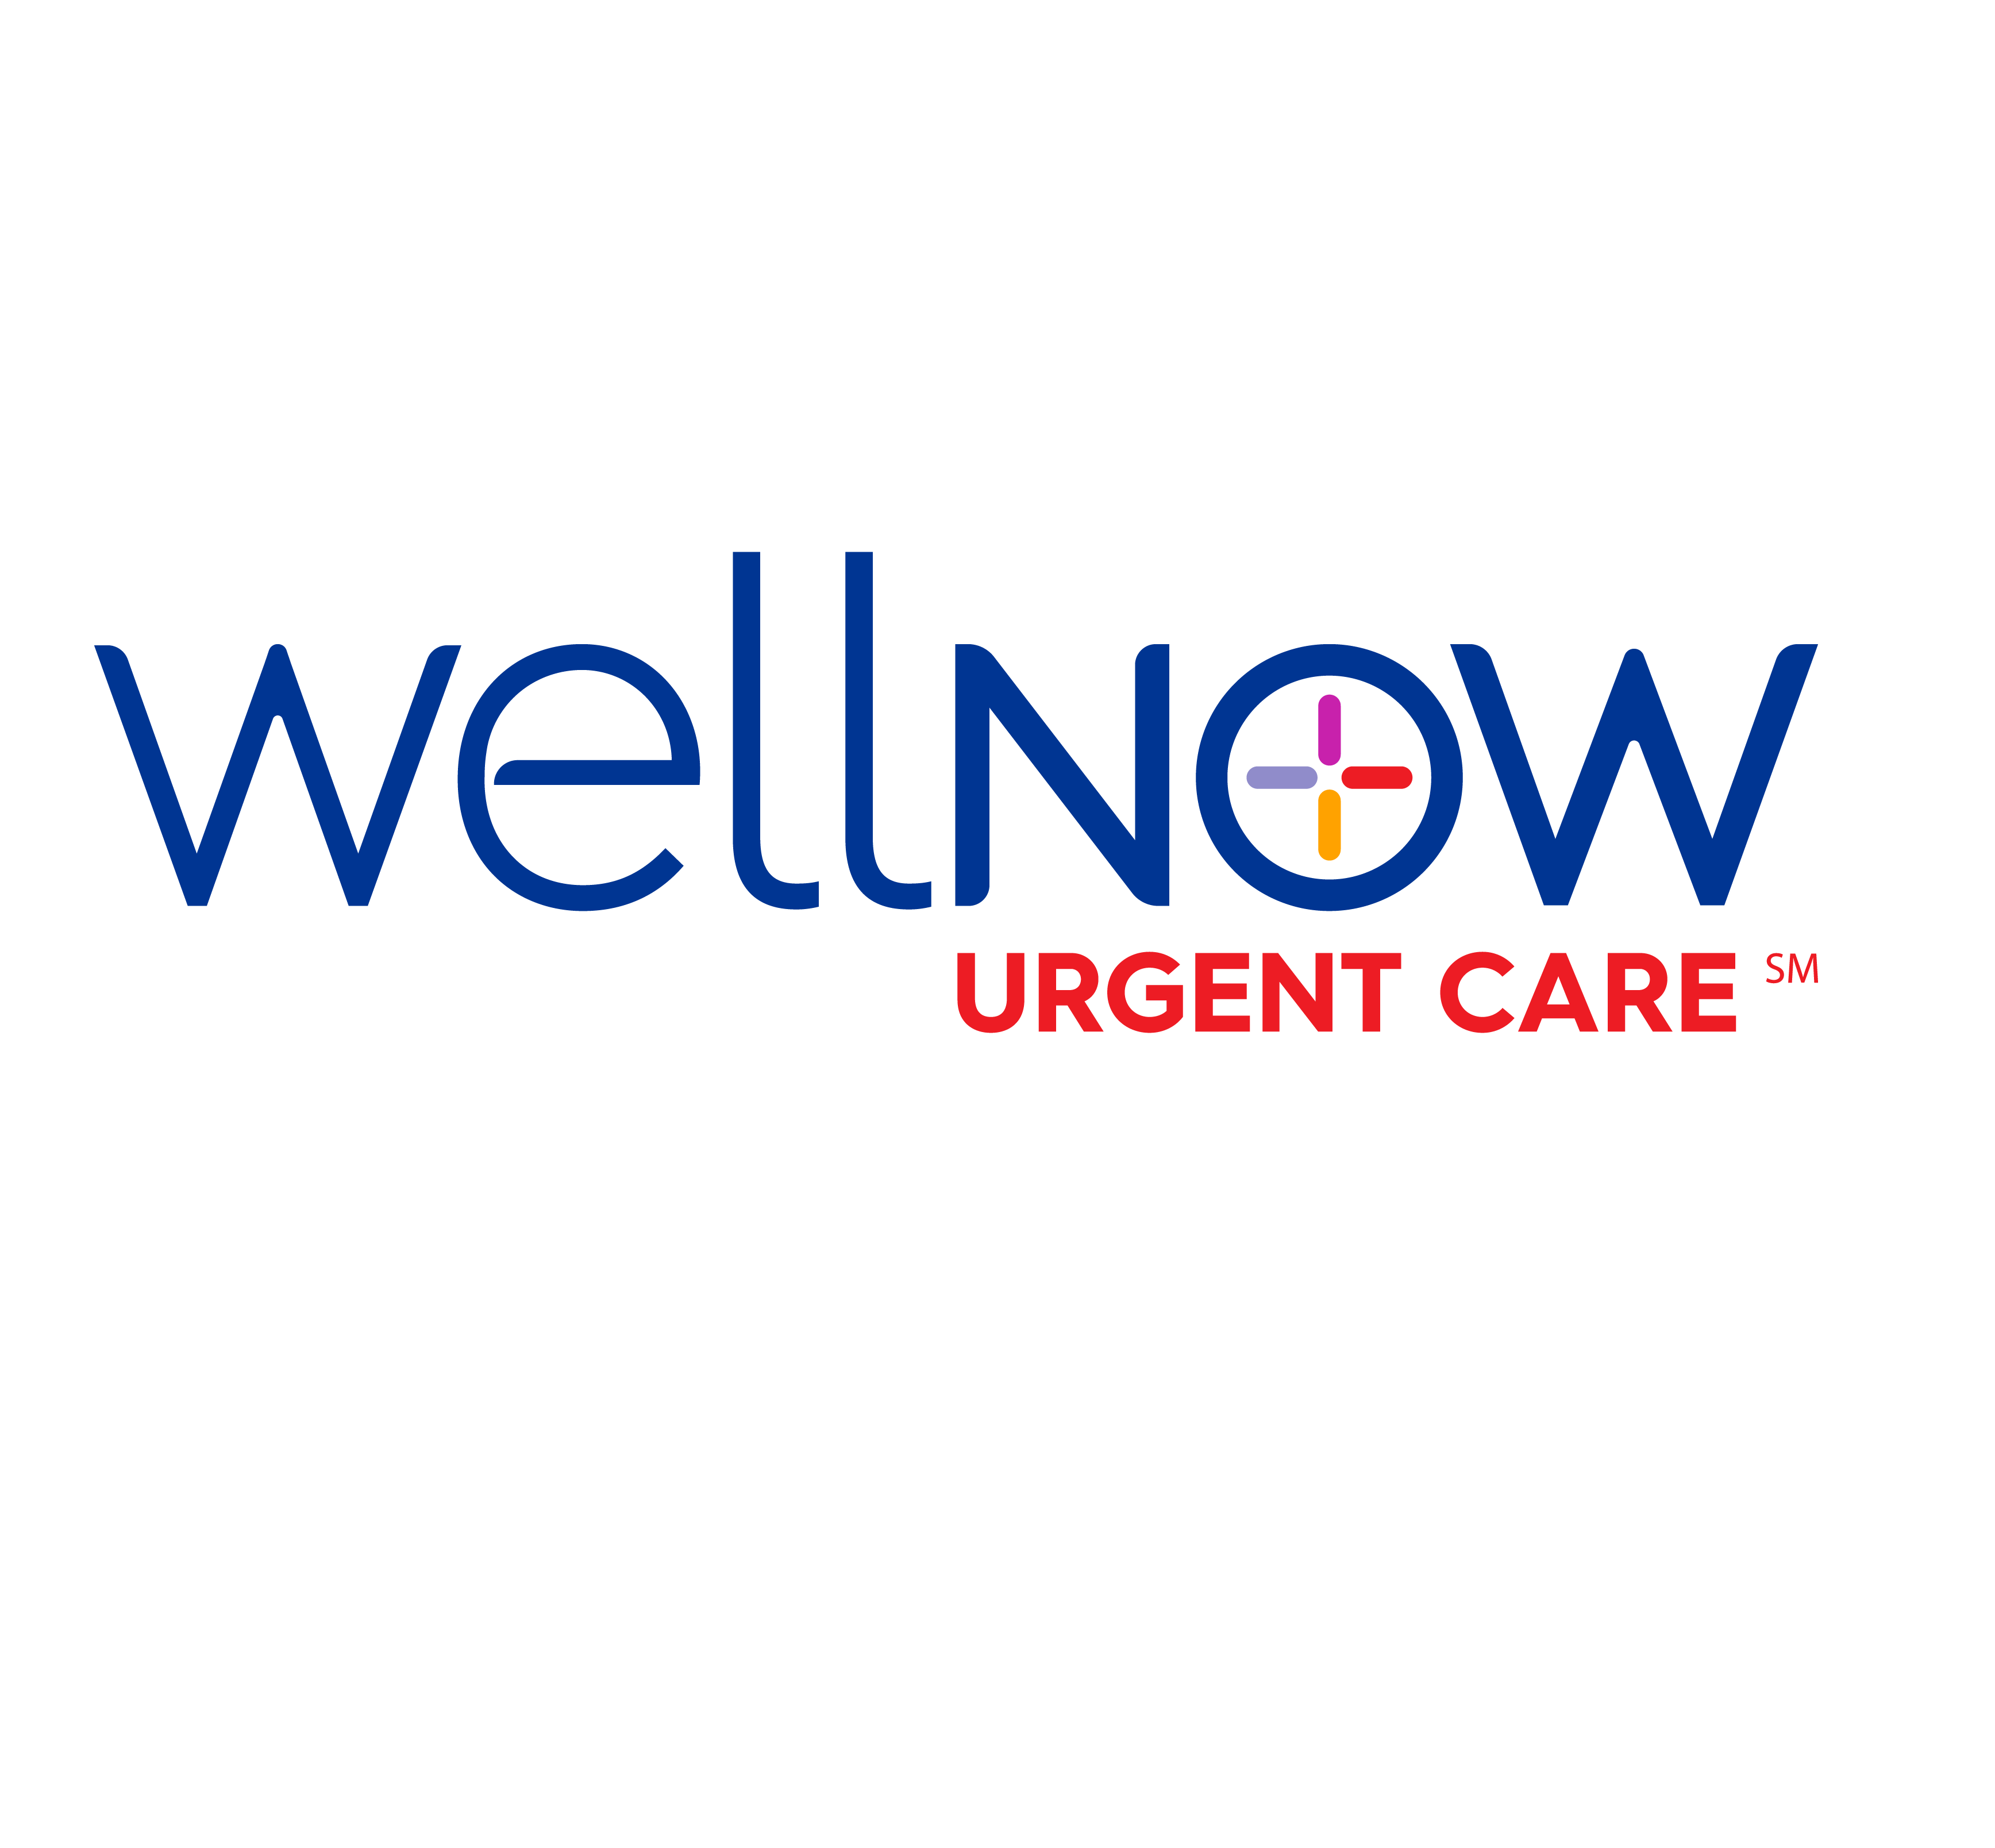 WellNow Urgent Care offers quick, quality urgent care with exceptional service for the non-life-threatening injuries and illnesses that you or your family may face. From coughs and colds to sprains and strains, we proudly offer convenient healthcare with online check-ins.